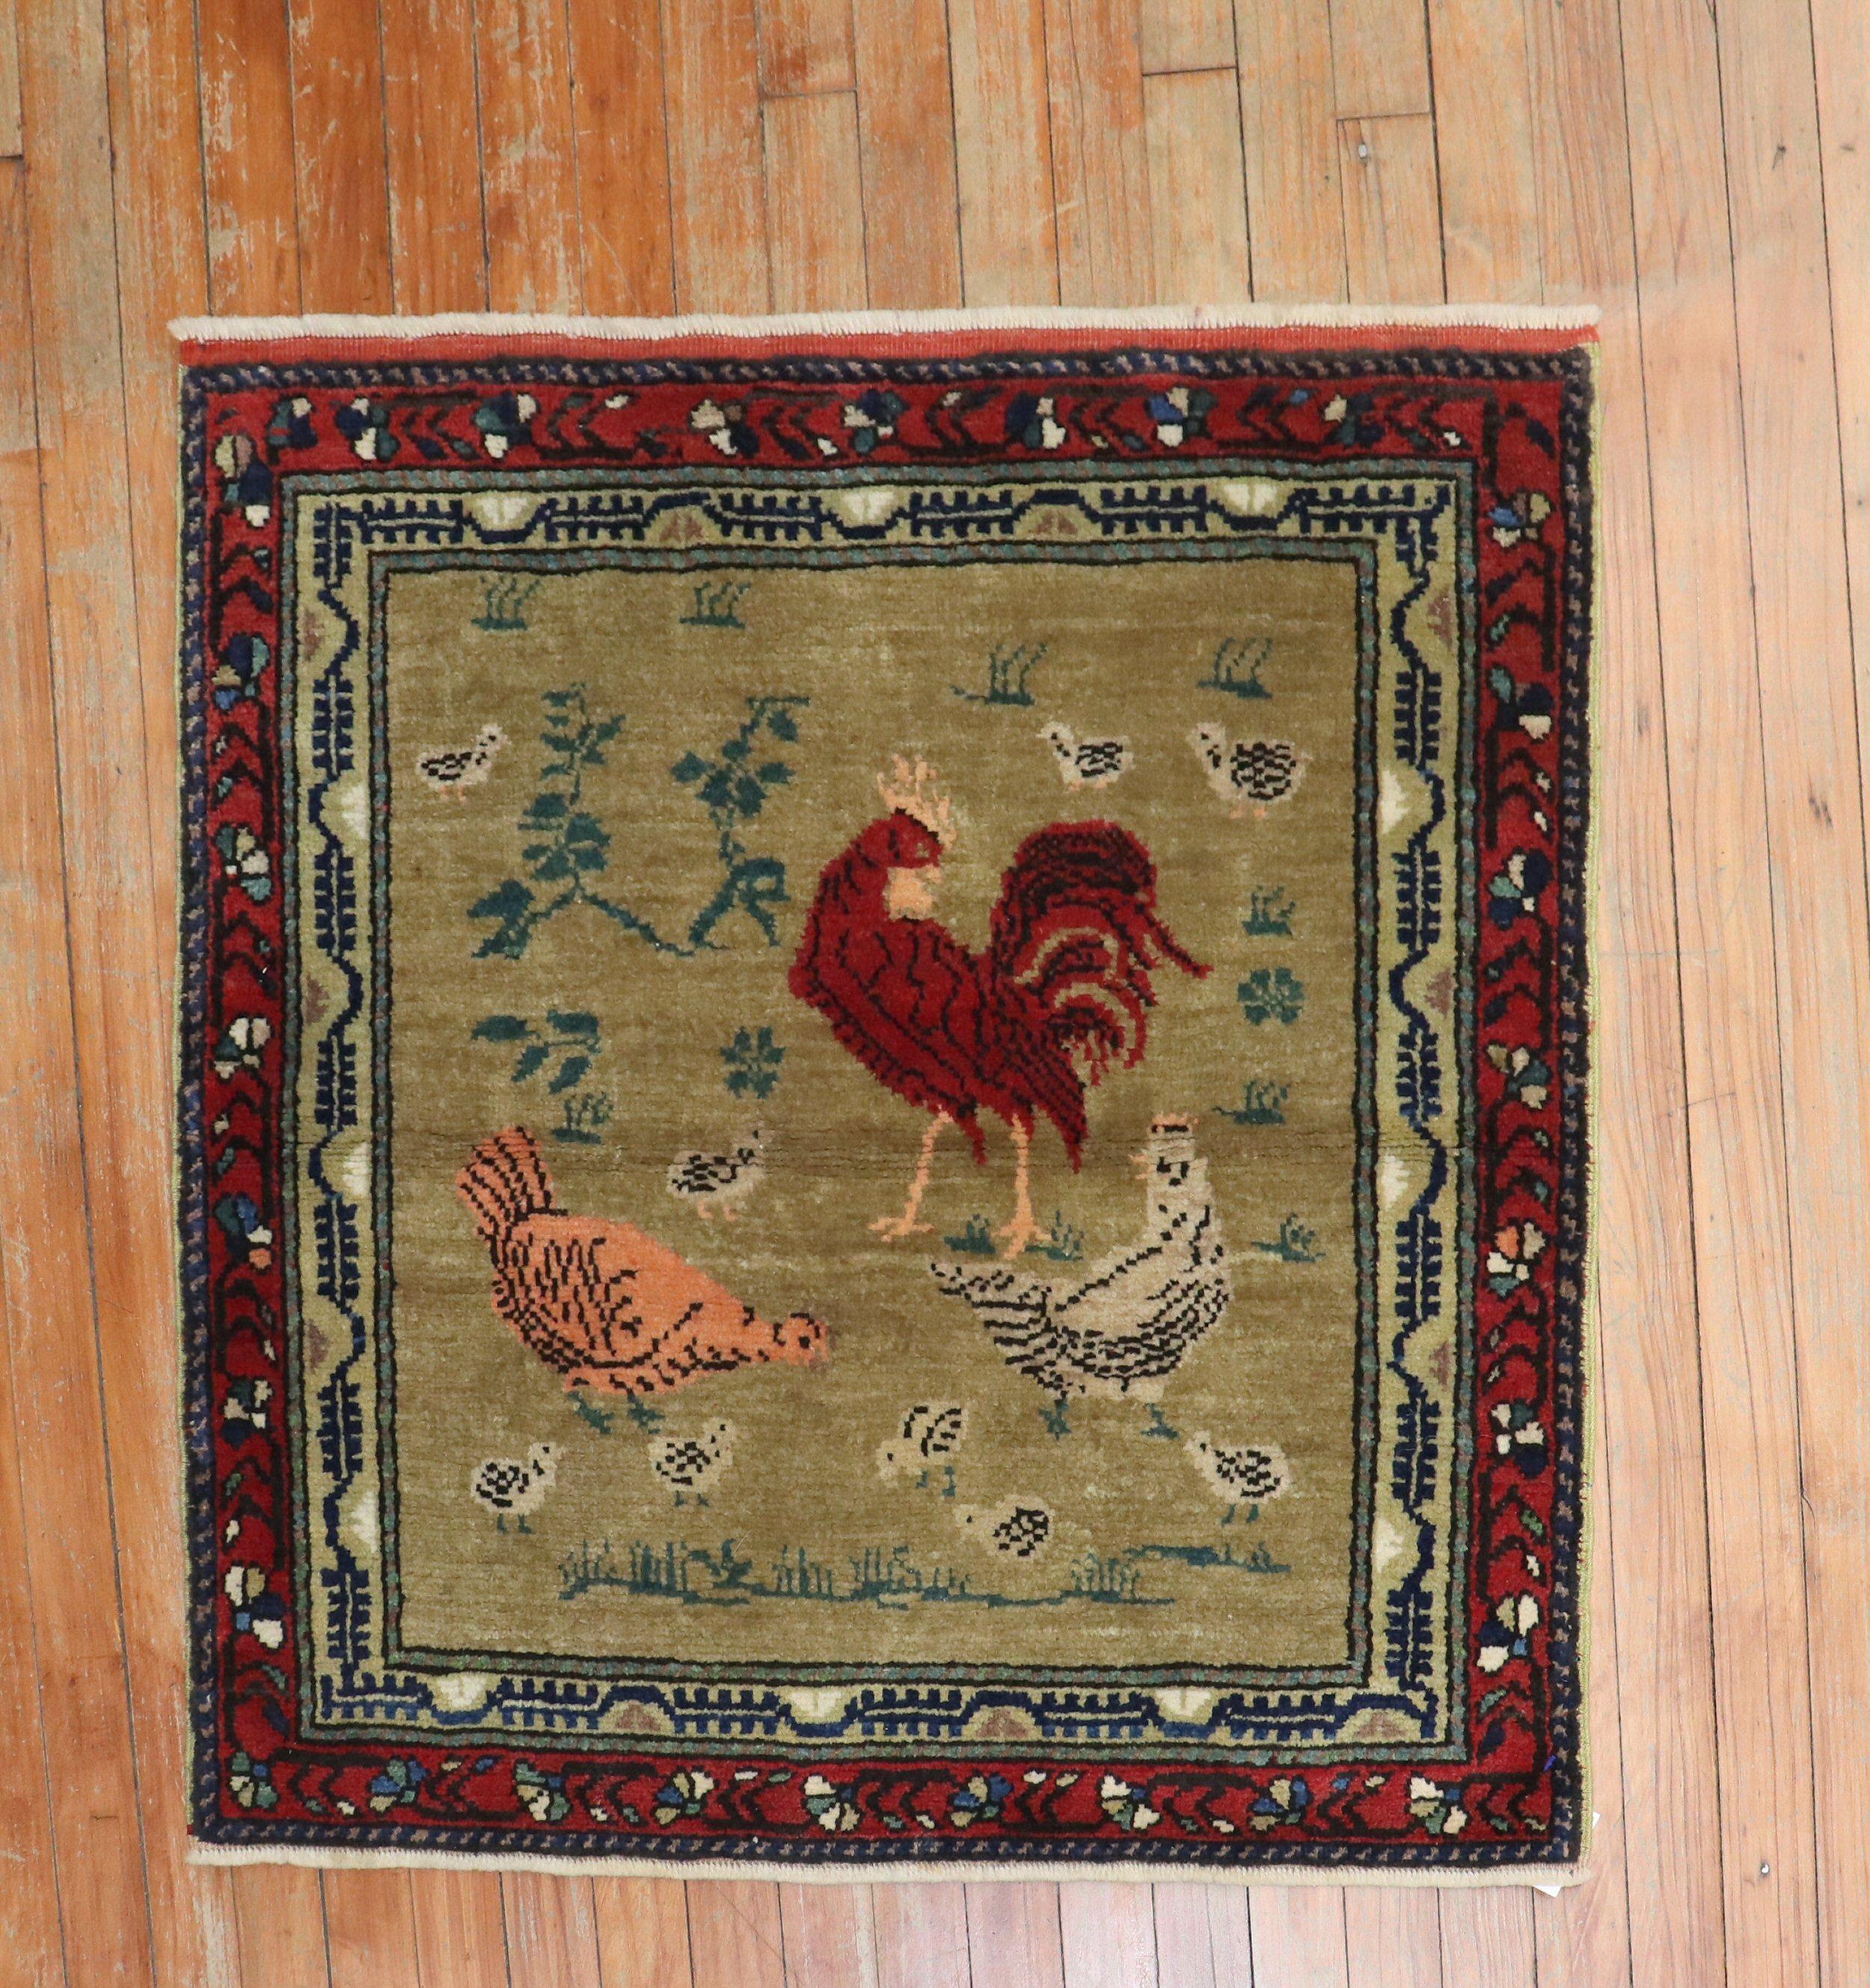 mid 20th century turkish rug depicting a chicken and rooster on a brown field

Measures: 2'10